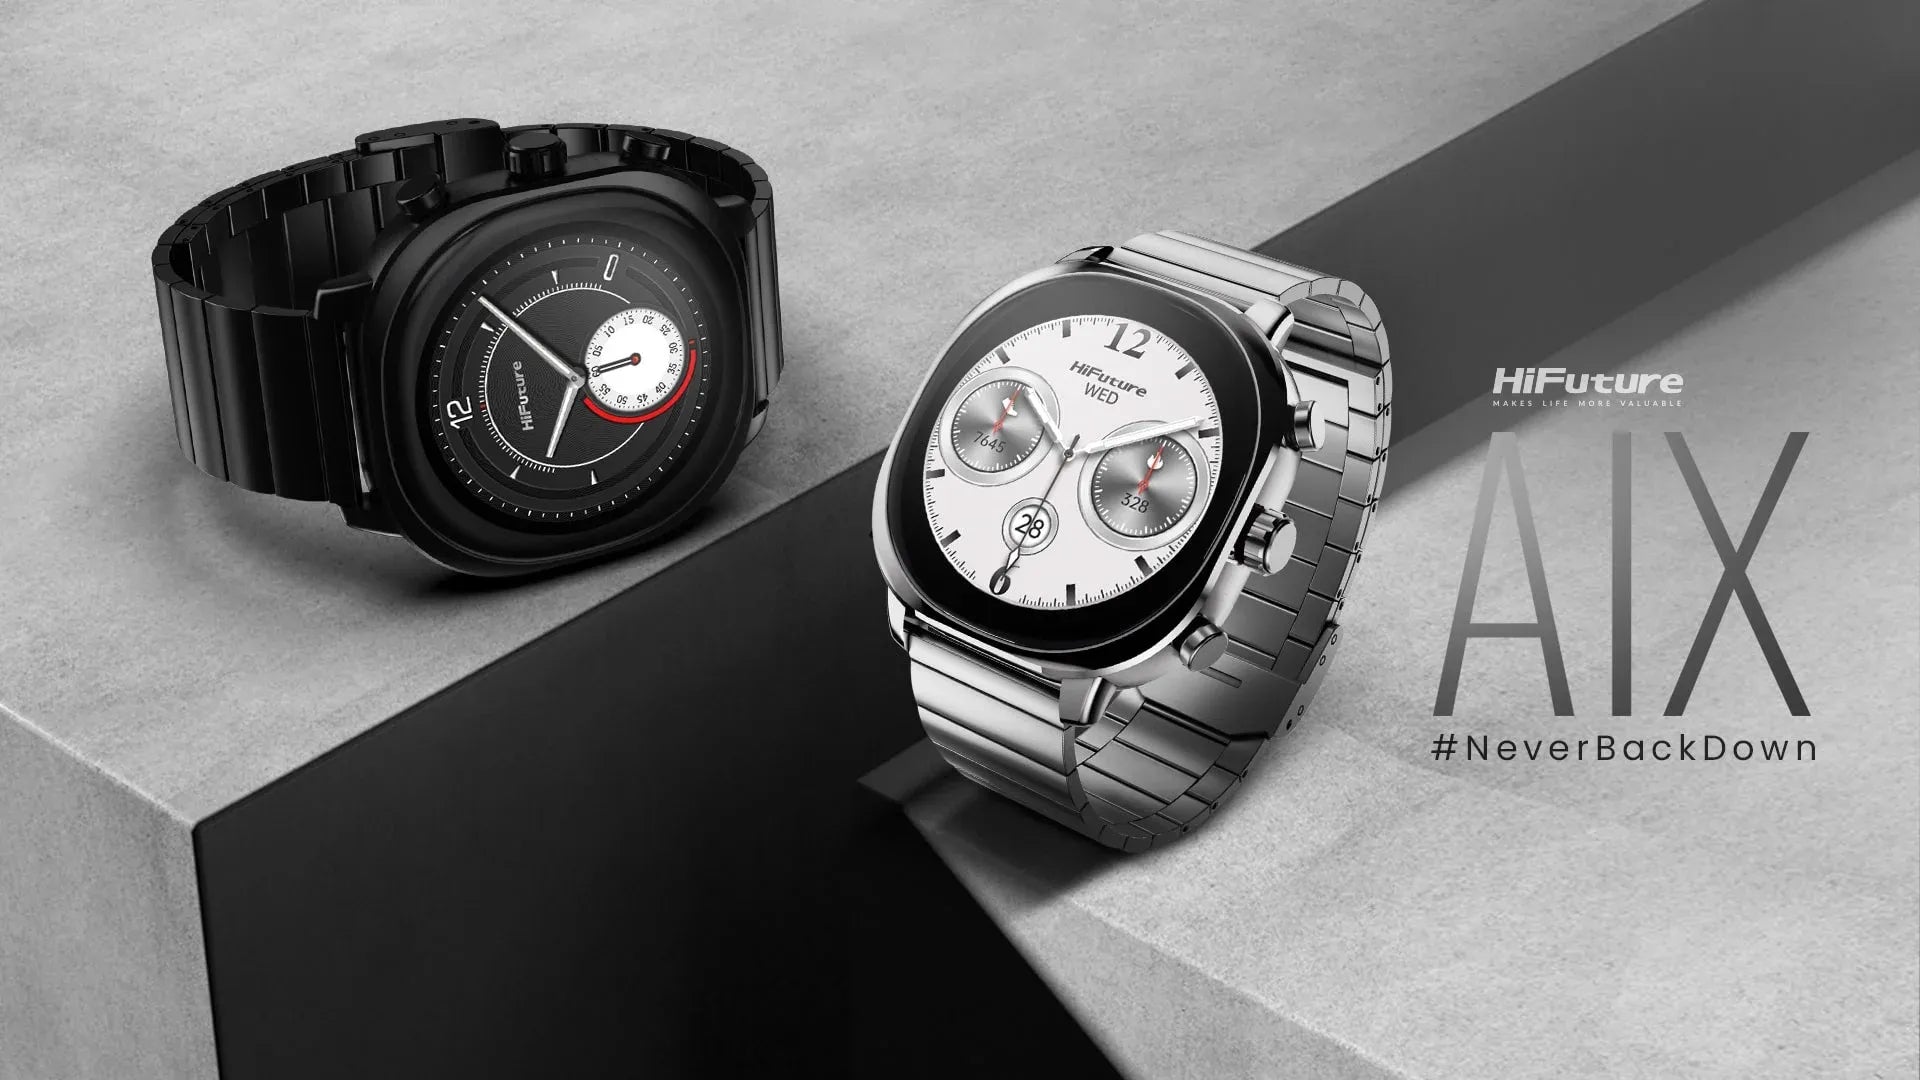 Experience What Luxury and Confidence Feels Like with HiFuture’s AIX Smartwatch